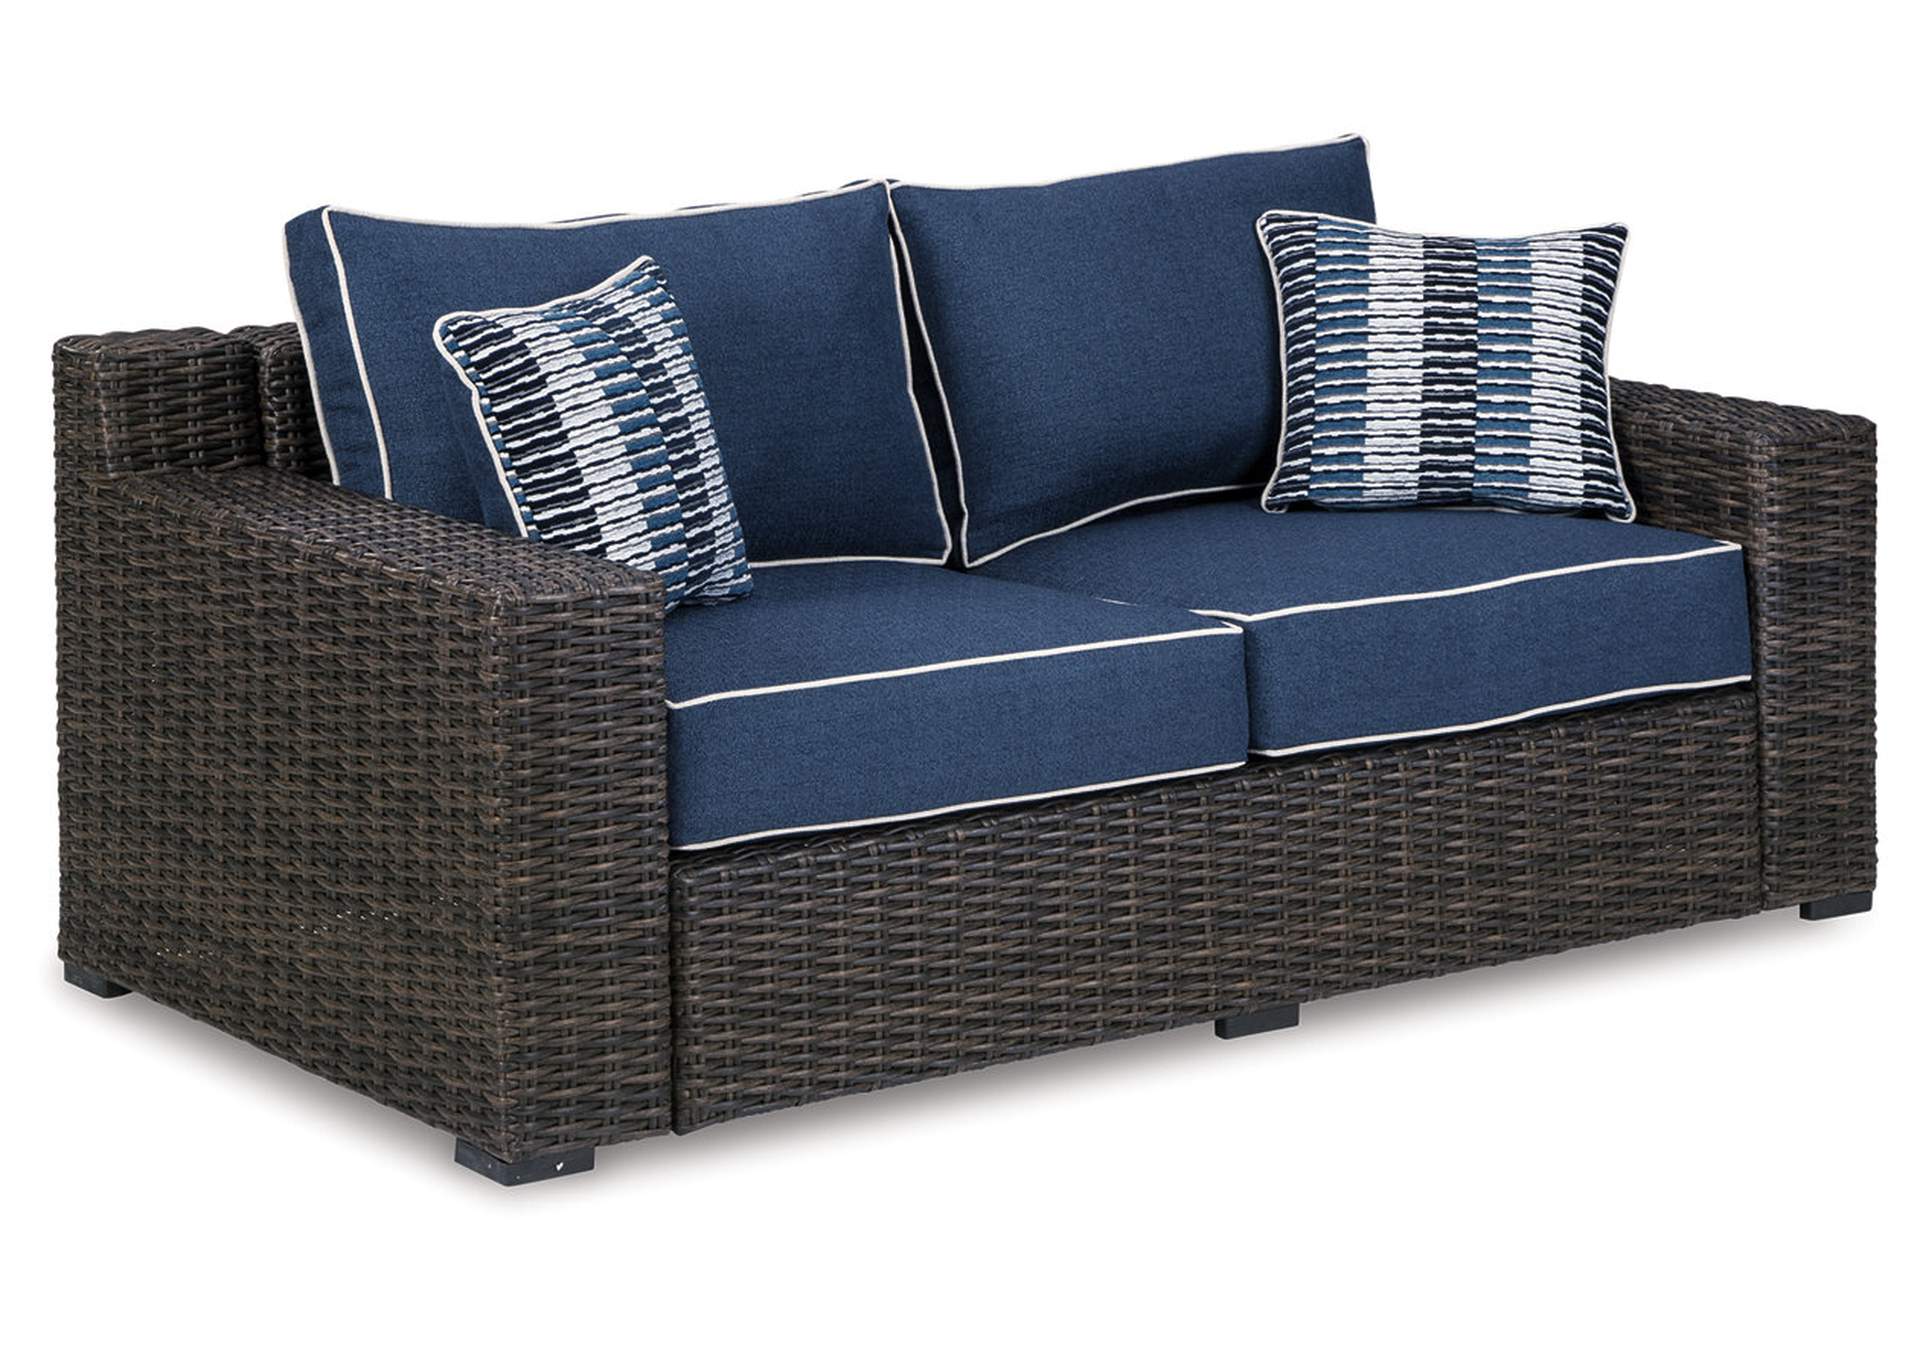 Grasson Lane Loveseat with Cushion,Outdoor By Ashley